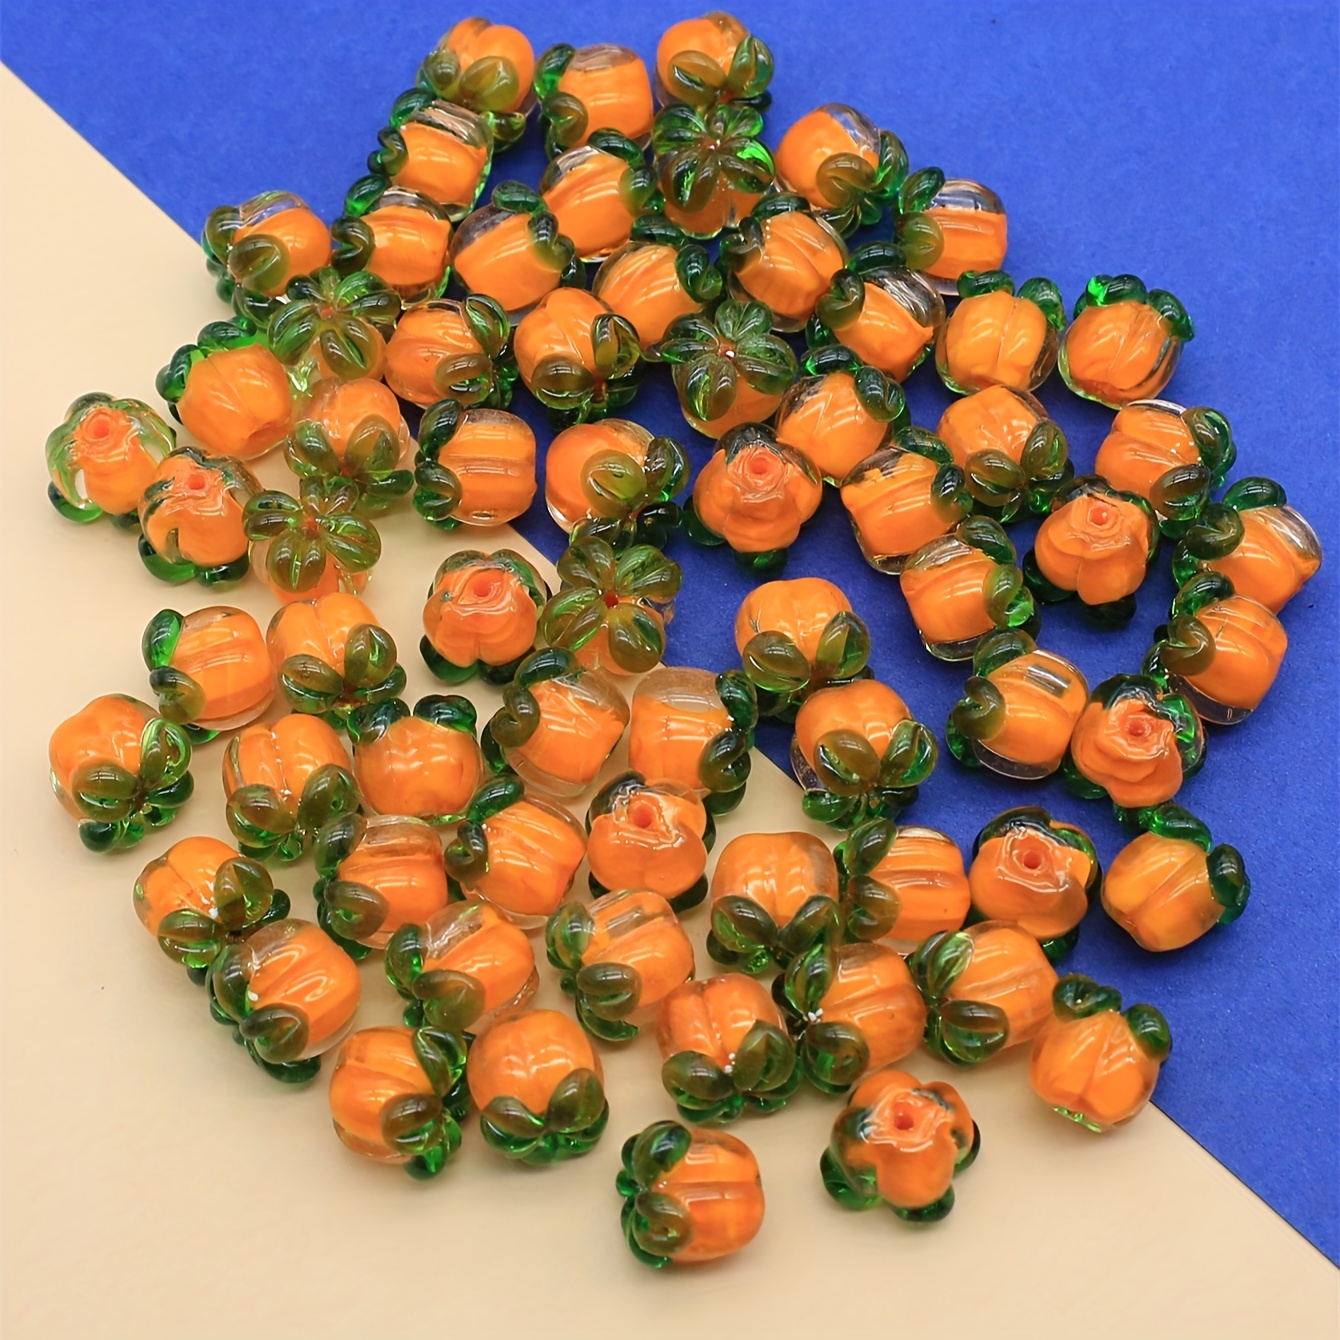 

10pcs Adorable Glass Persimmon & Pumpkin Beads For Diy Jewelry Making - Perfect For Bracelets, Necklaces, Earrings & Hair Accessories